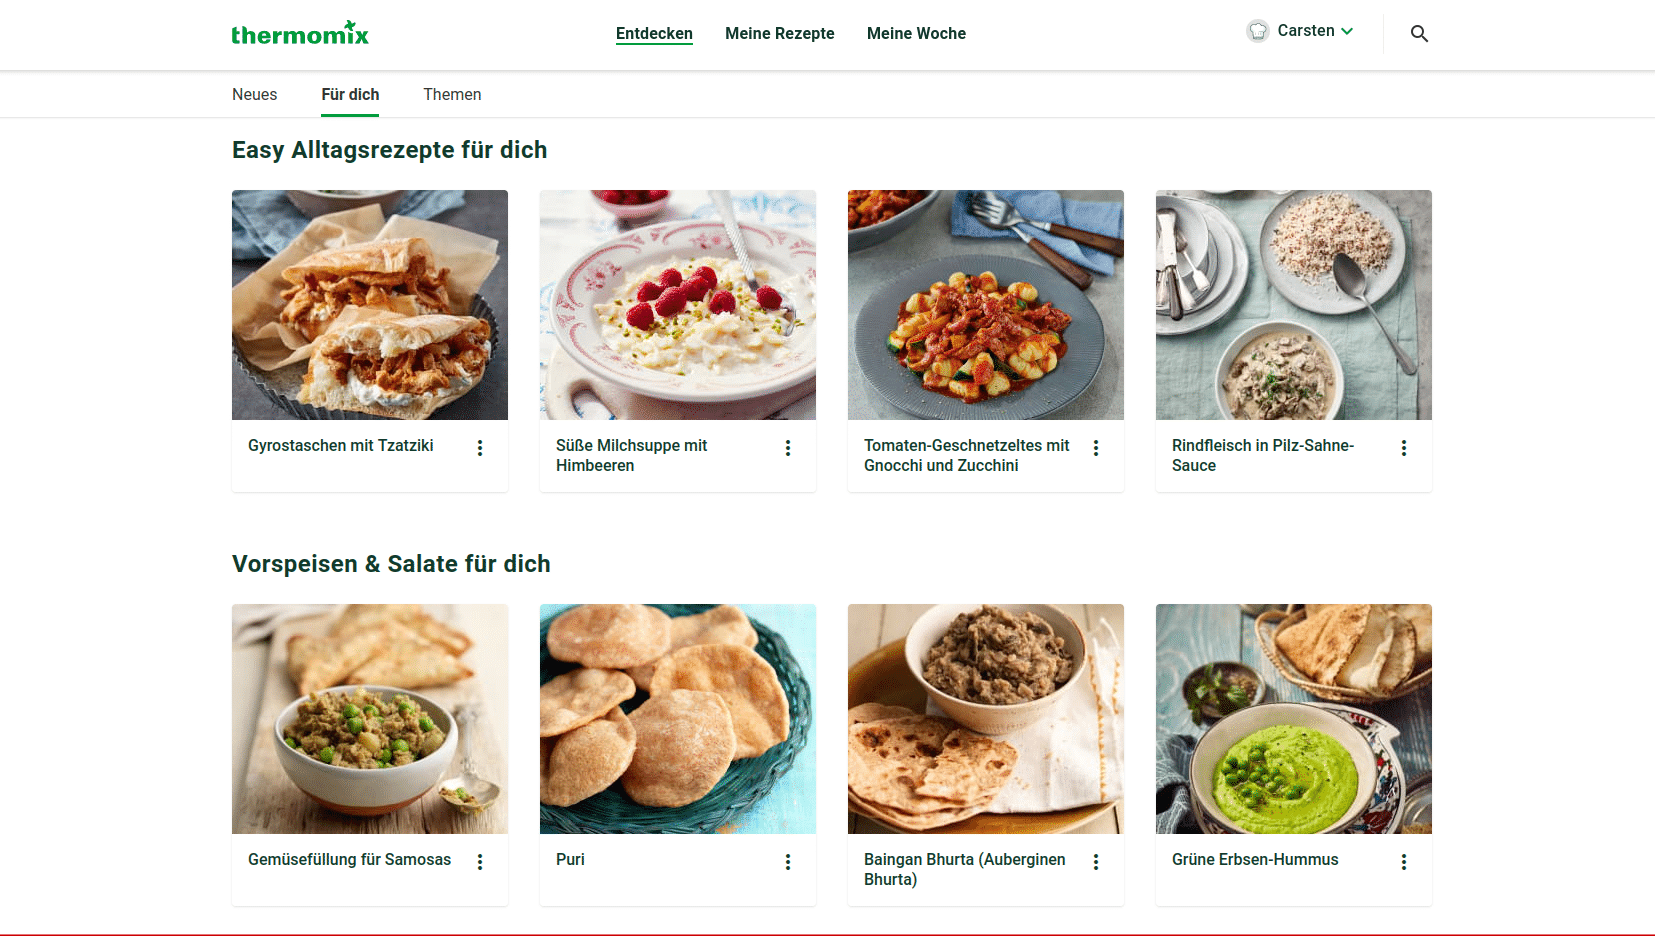 recipe recommender system for Thermomix on Cookidoo